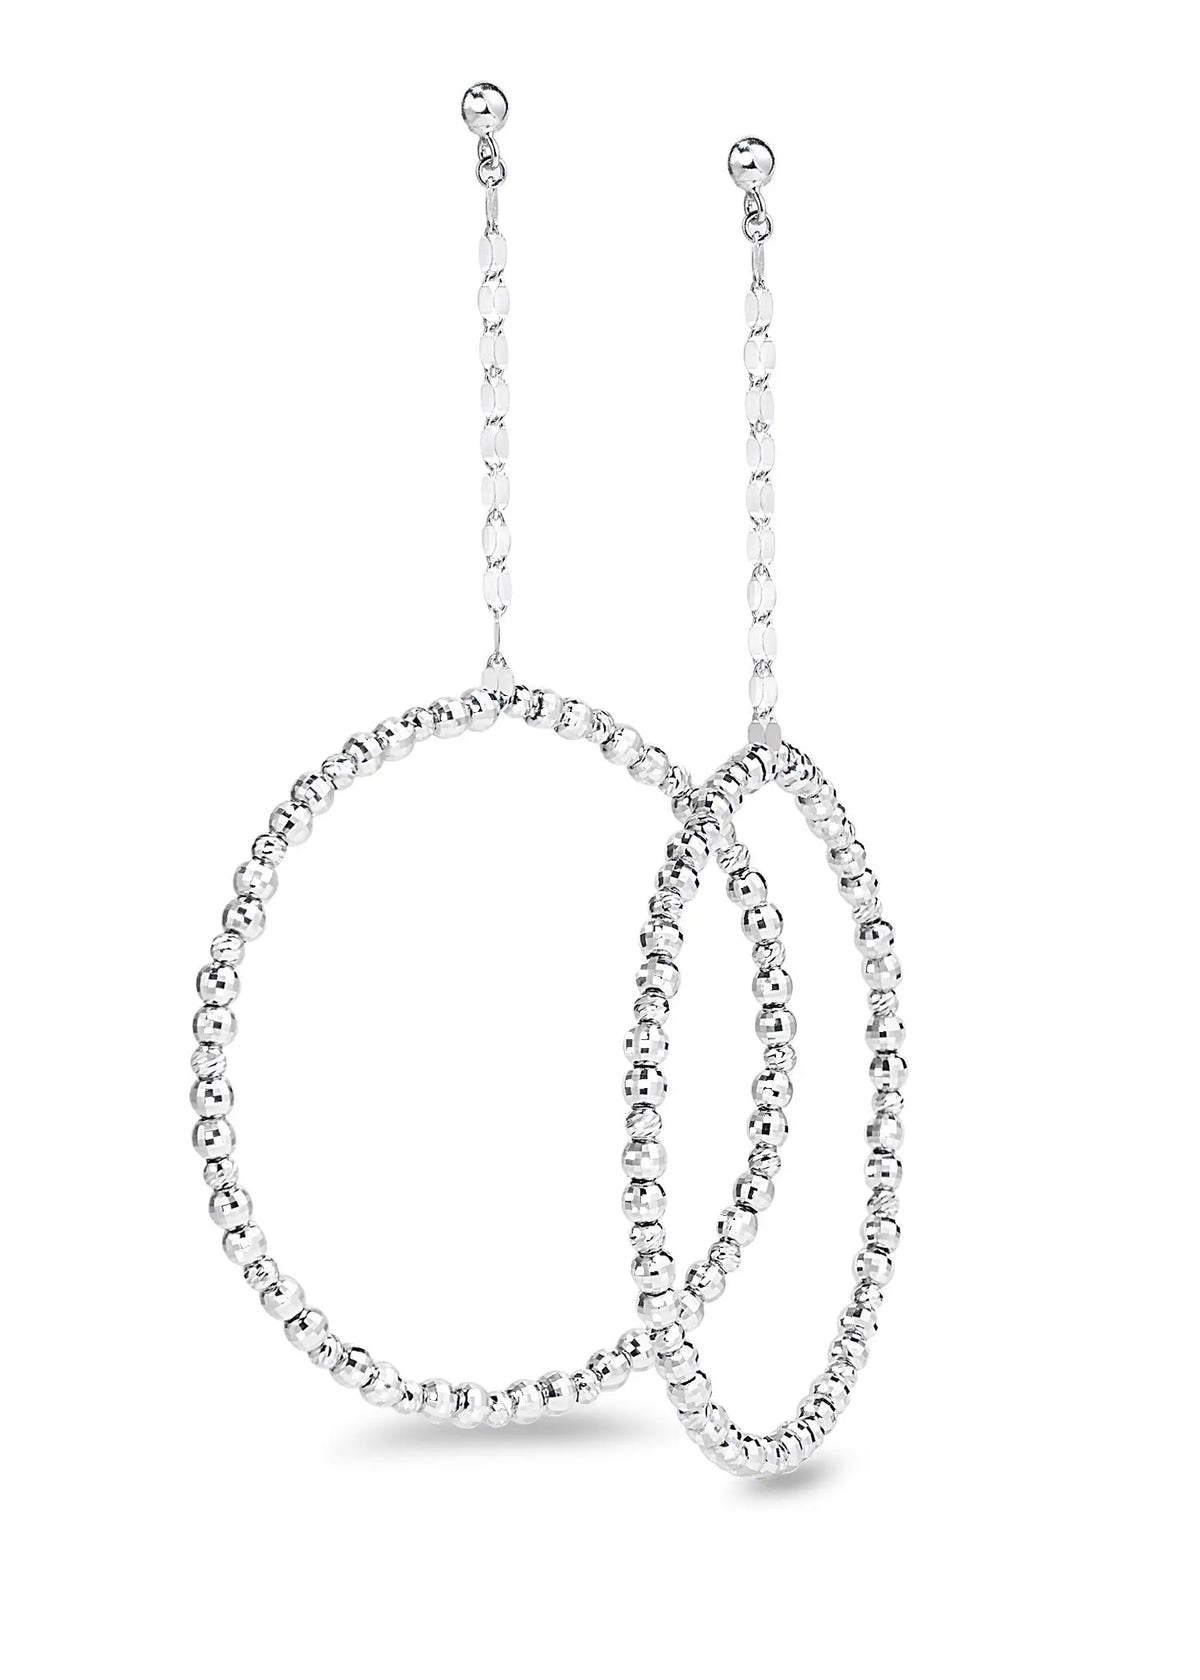 A full circle of tiny, glimmering platinum beads are strung along a flexible wire that hangs from flat, petals of platinum.  Product Details:  Platinum Post and Silicone Catch 2.9 Inches 1.57 Inch Diameter Designed by Platinum Born  If an item is out of stock, please allow 3-6 weeks for delivery